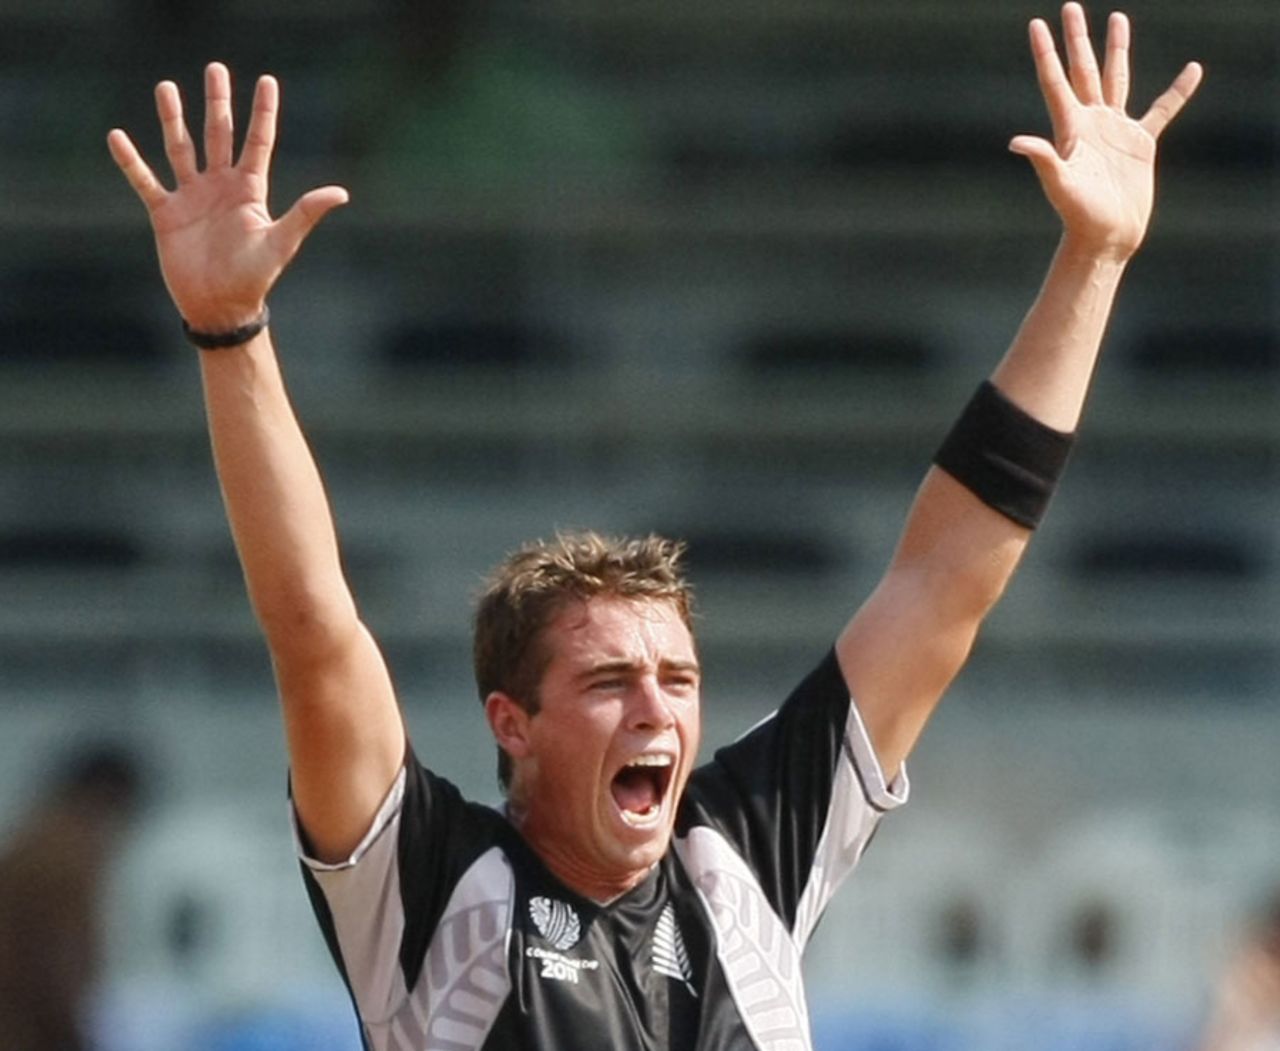 Tim Southee provided the first breakthrough for New Zealand, Kenya v New Zealand, Group A, World Cup 2011, Chennai, February 20, 2011